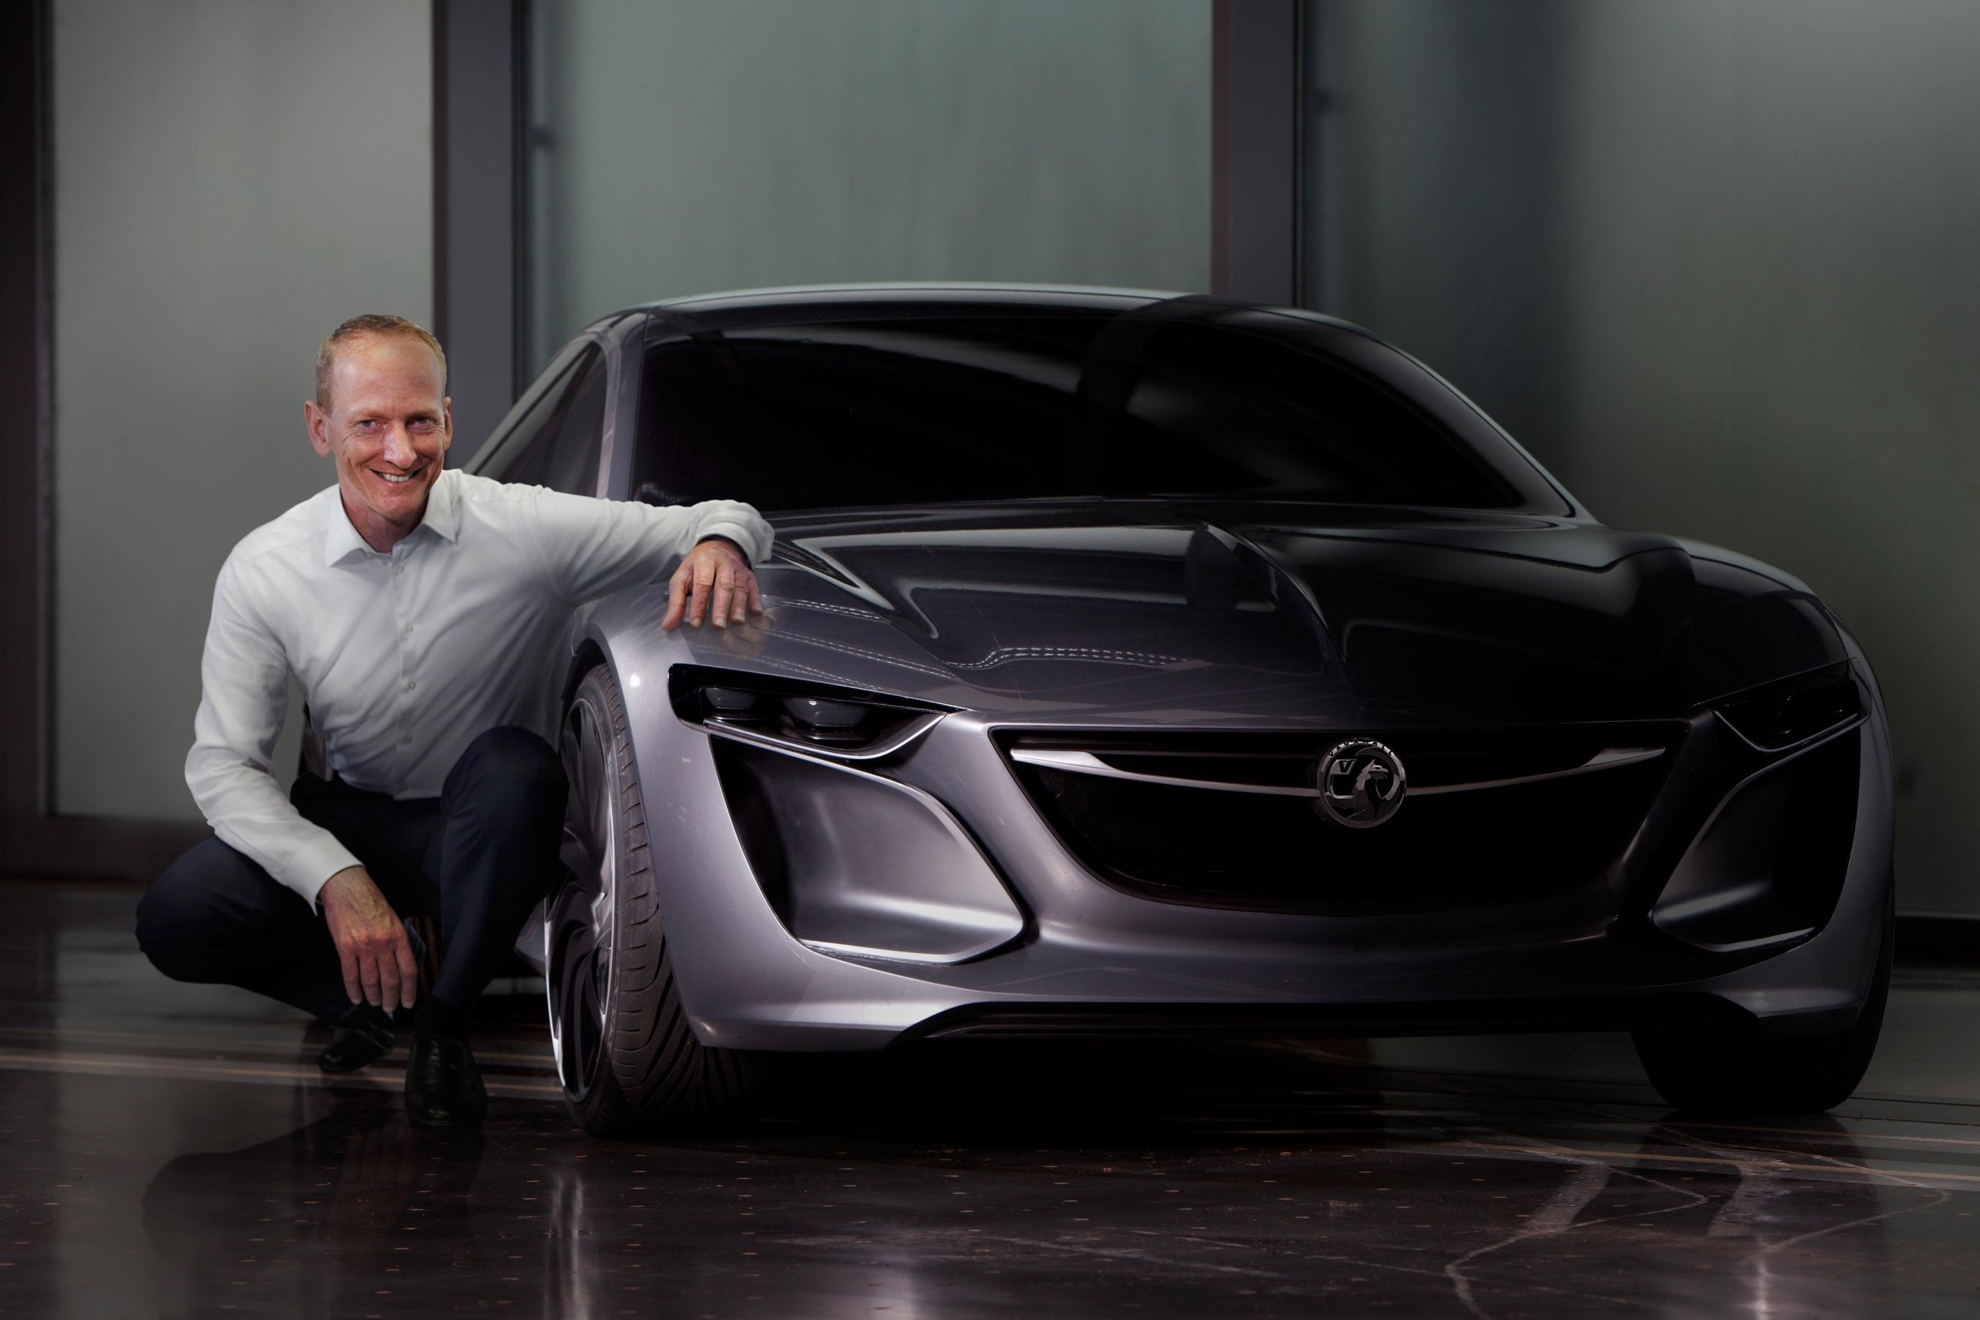 VAUXHALL MONZA CONCEPT IS VISION OF OPEL/VAUXHALL’S FUTURE